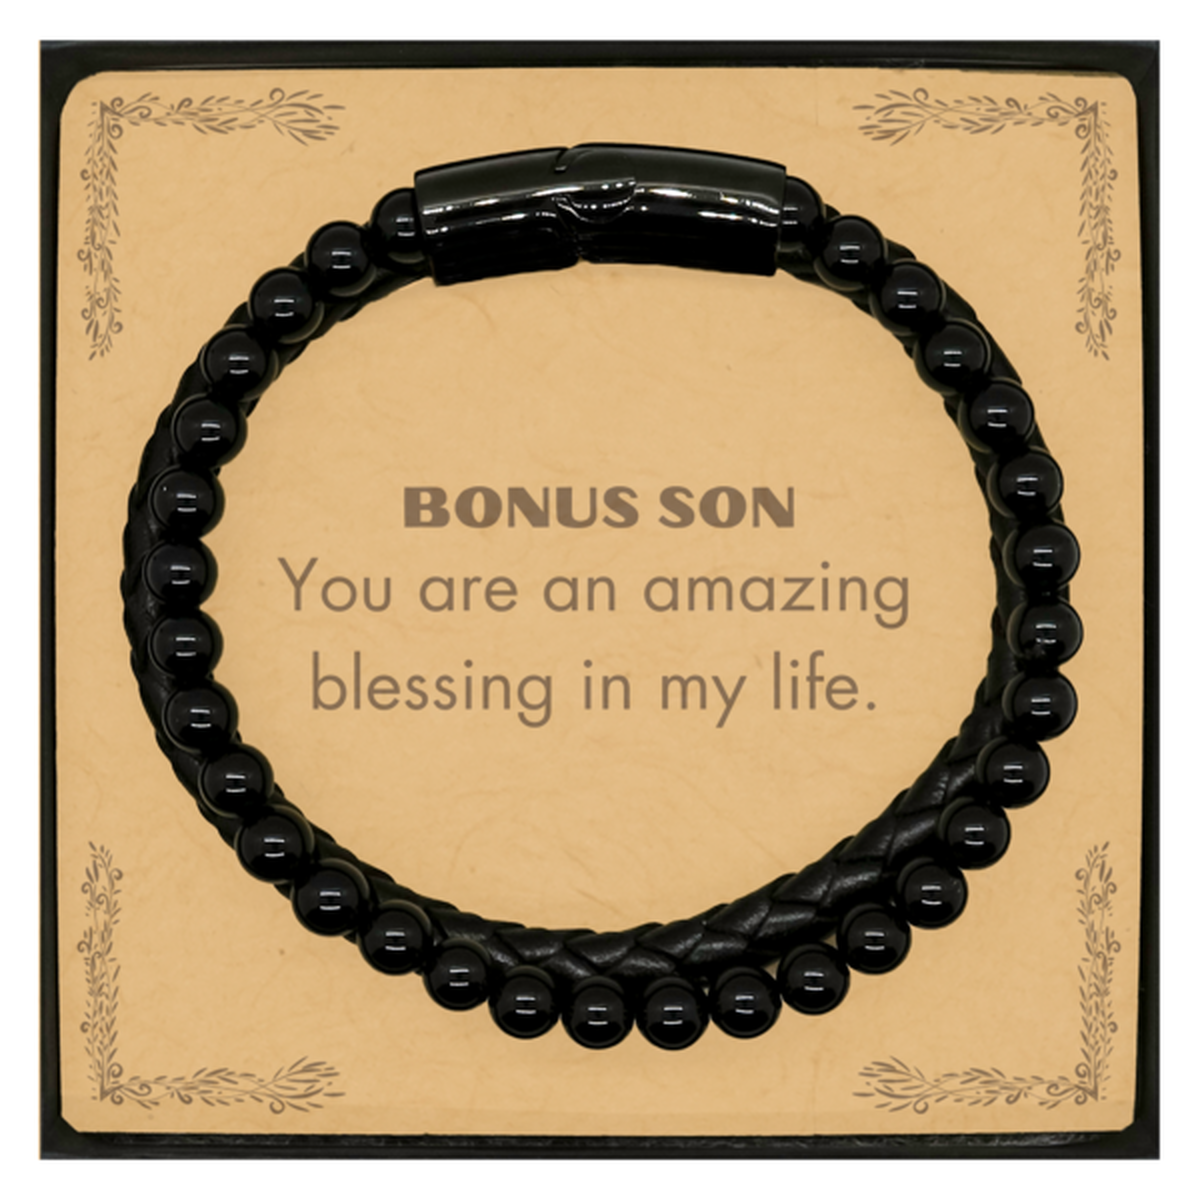 Bonus Son Stone Leather Bracelets, You are an amazing blessing in my life, Thank You Gifts For Bonus Son, Inspirational Birthday Christmas Unique Gifts For Bonus Son